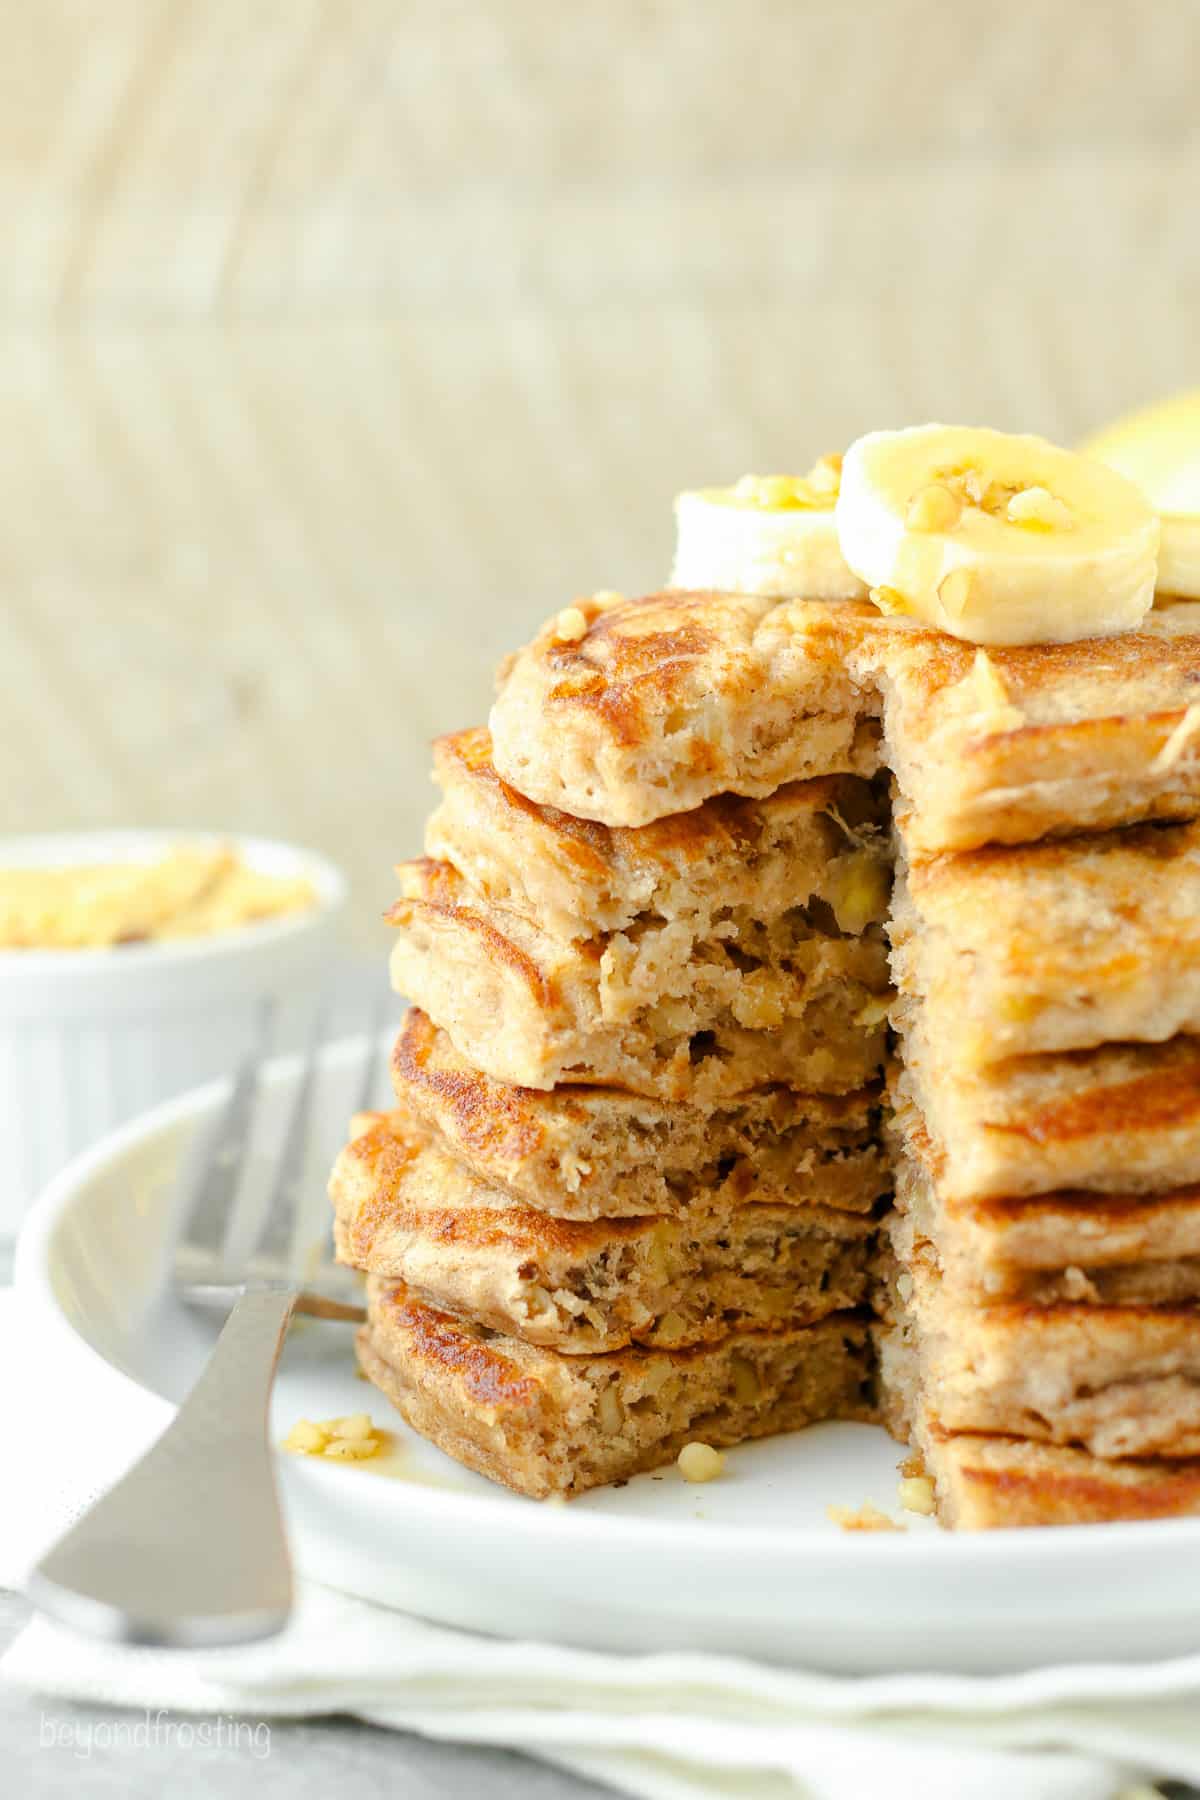 A stack of banana protein pancakes topped with banana slices and maple syrup, with a large slice cut out, on a white plate next to a fork.